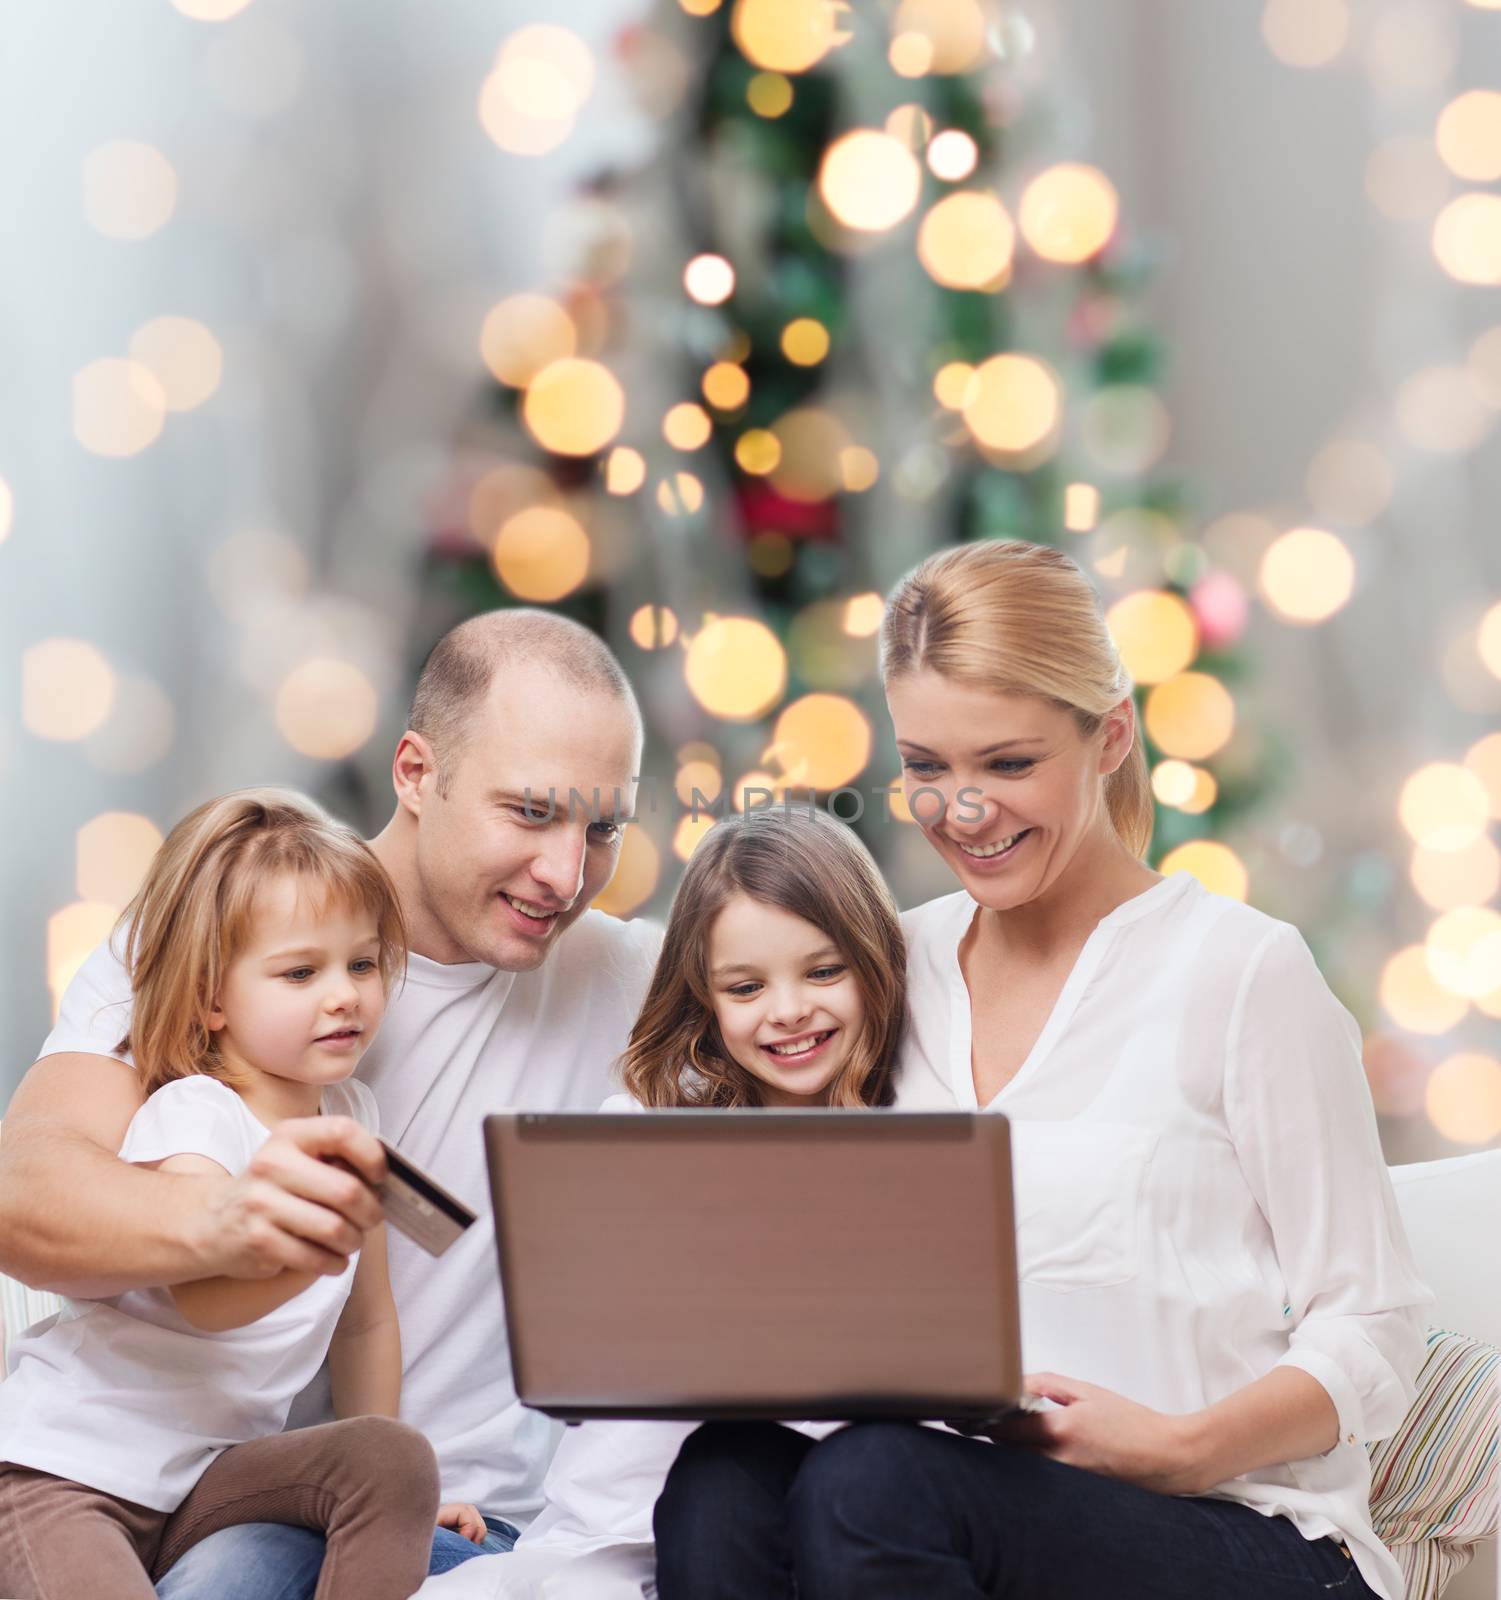 happy family with laptop computer and credit card by dolgachov